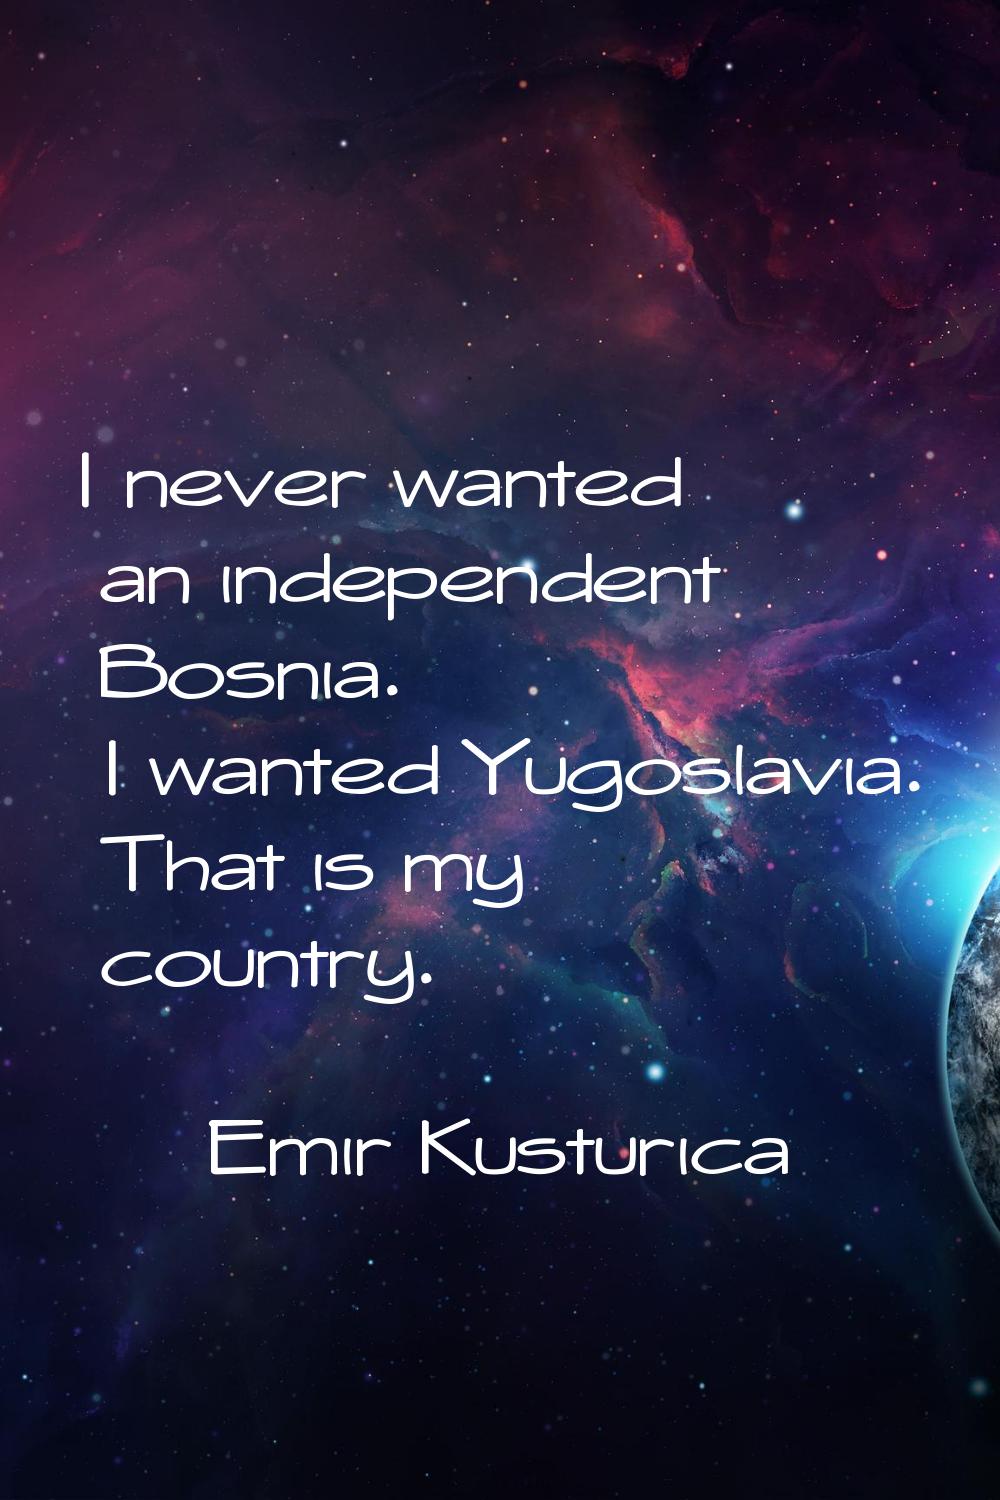 I never wanted an independent Bosnia. I wanted Yugoslavia. That is my country.